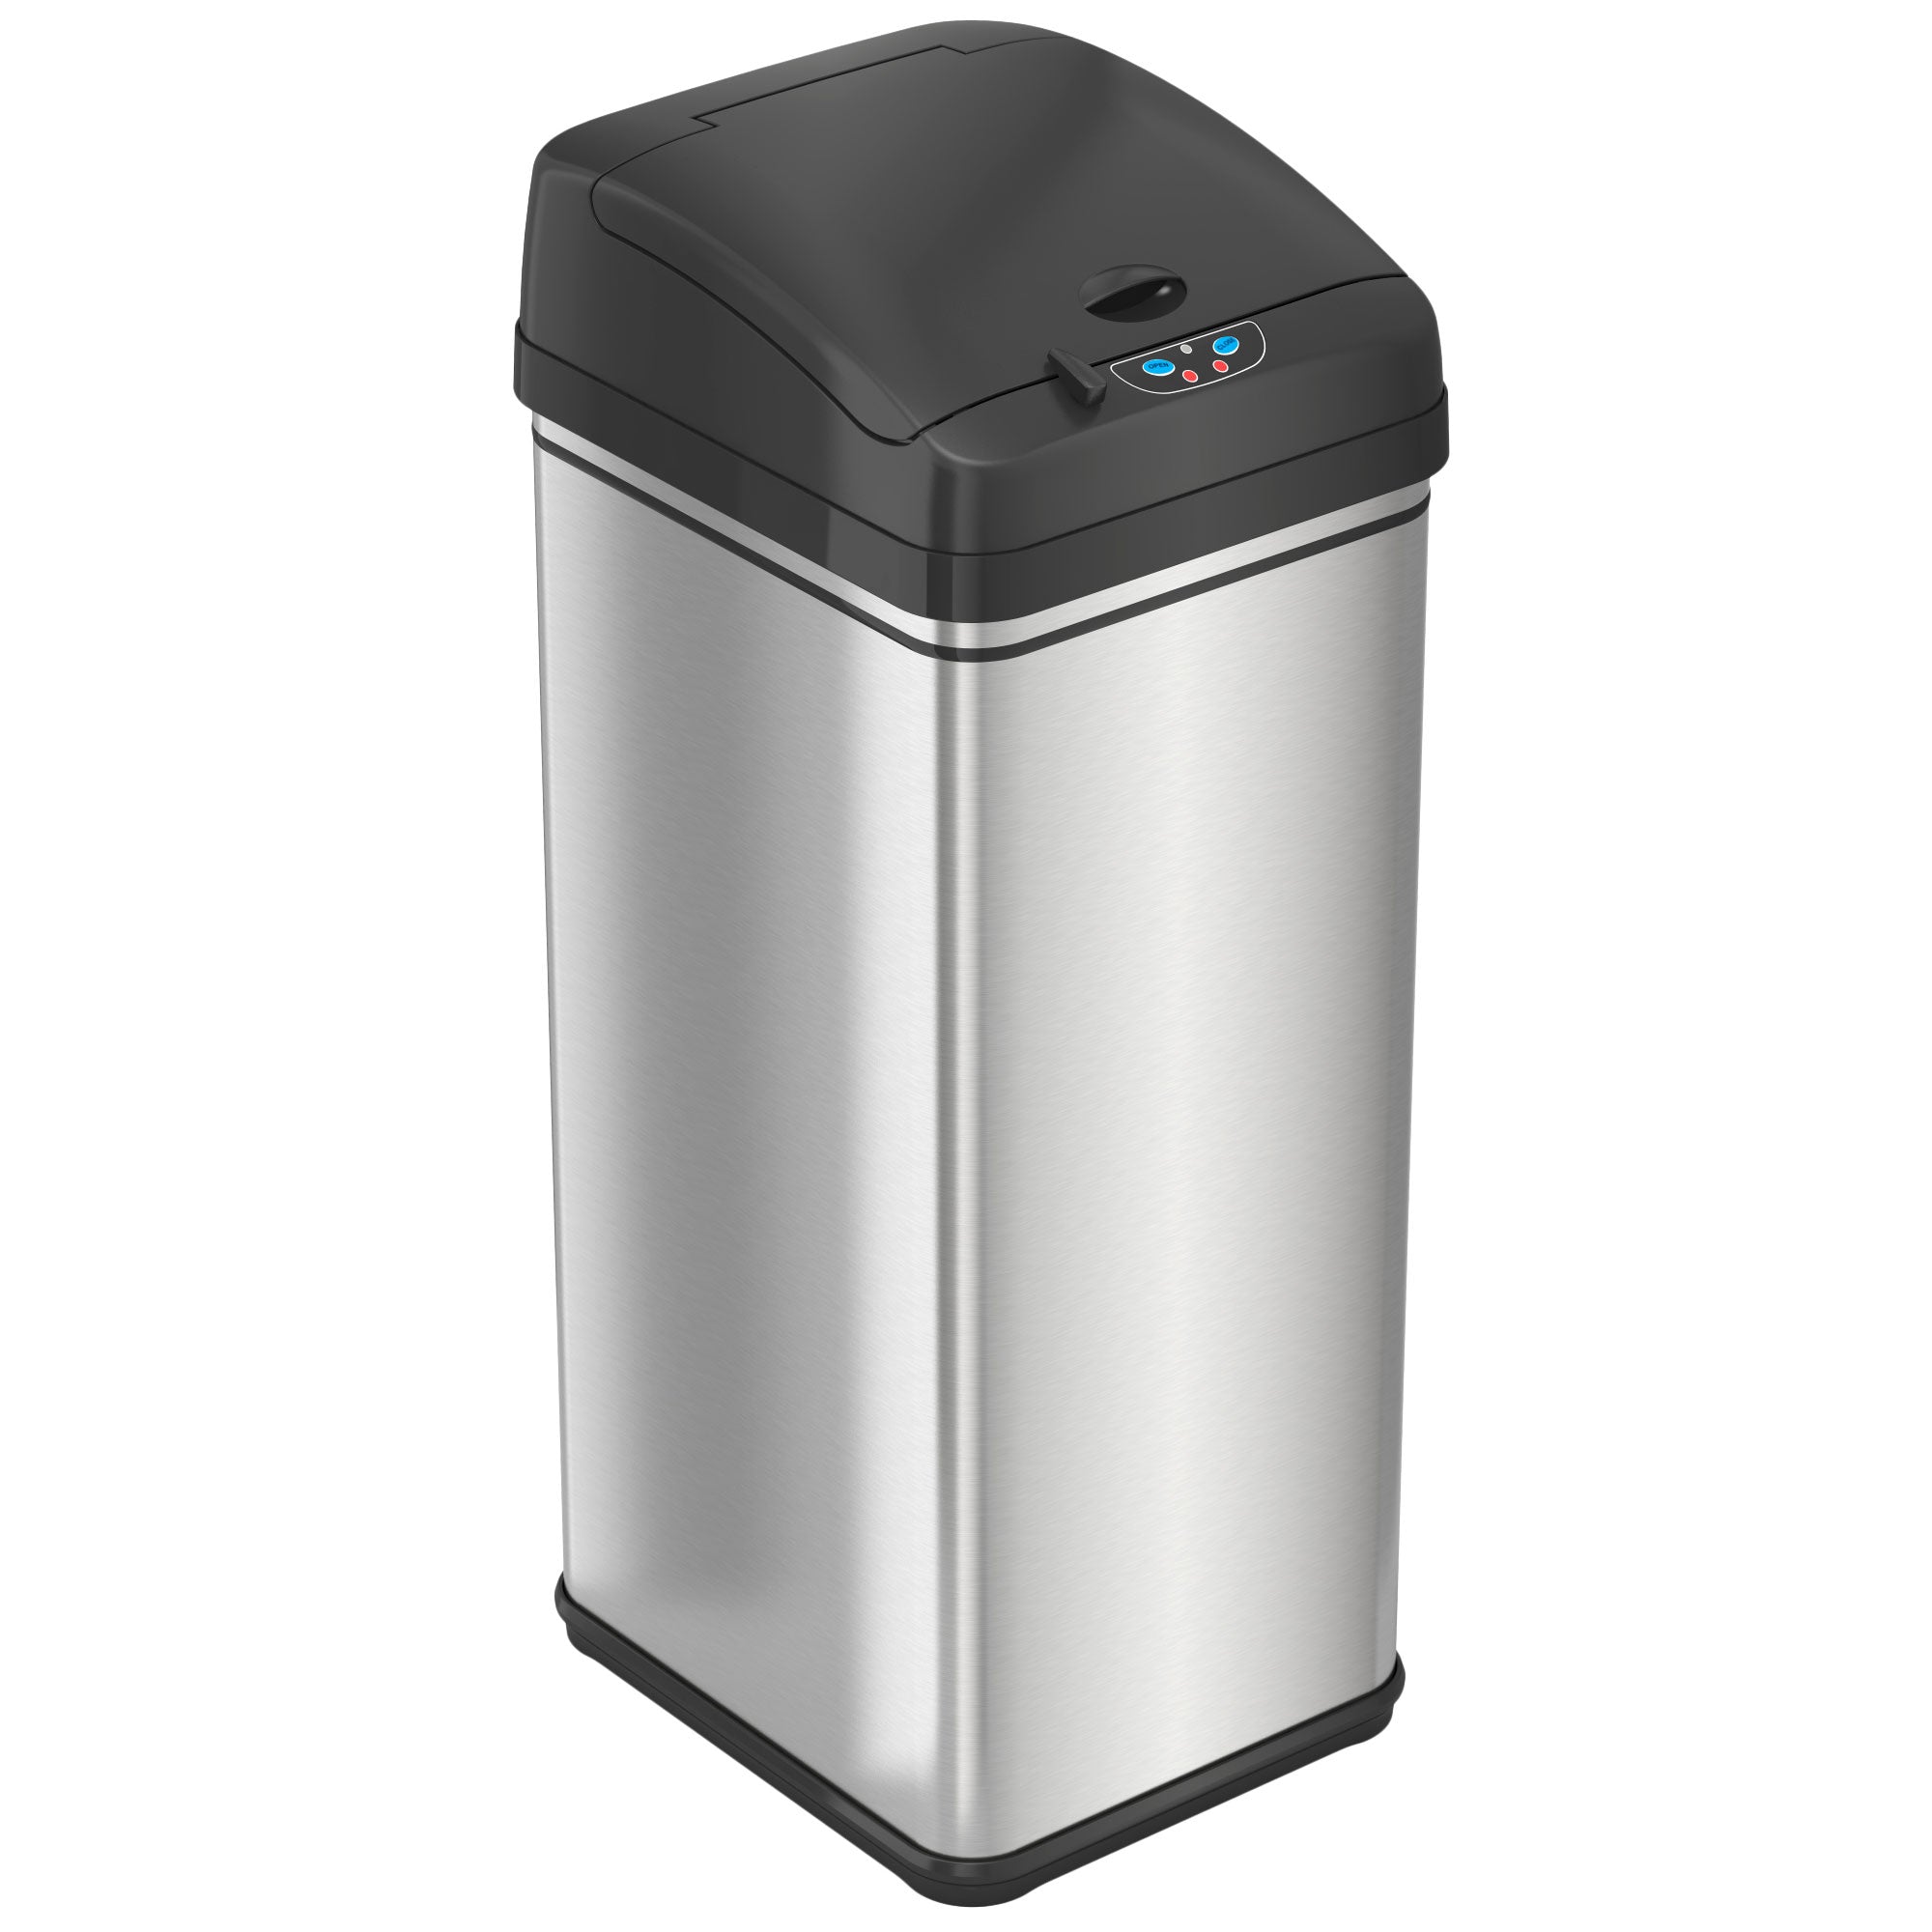 https://www.momjunction.com/wp-content/uploads/product-images/itouchless-stainless-steel-garbage-can_afl1218.jpg